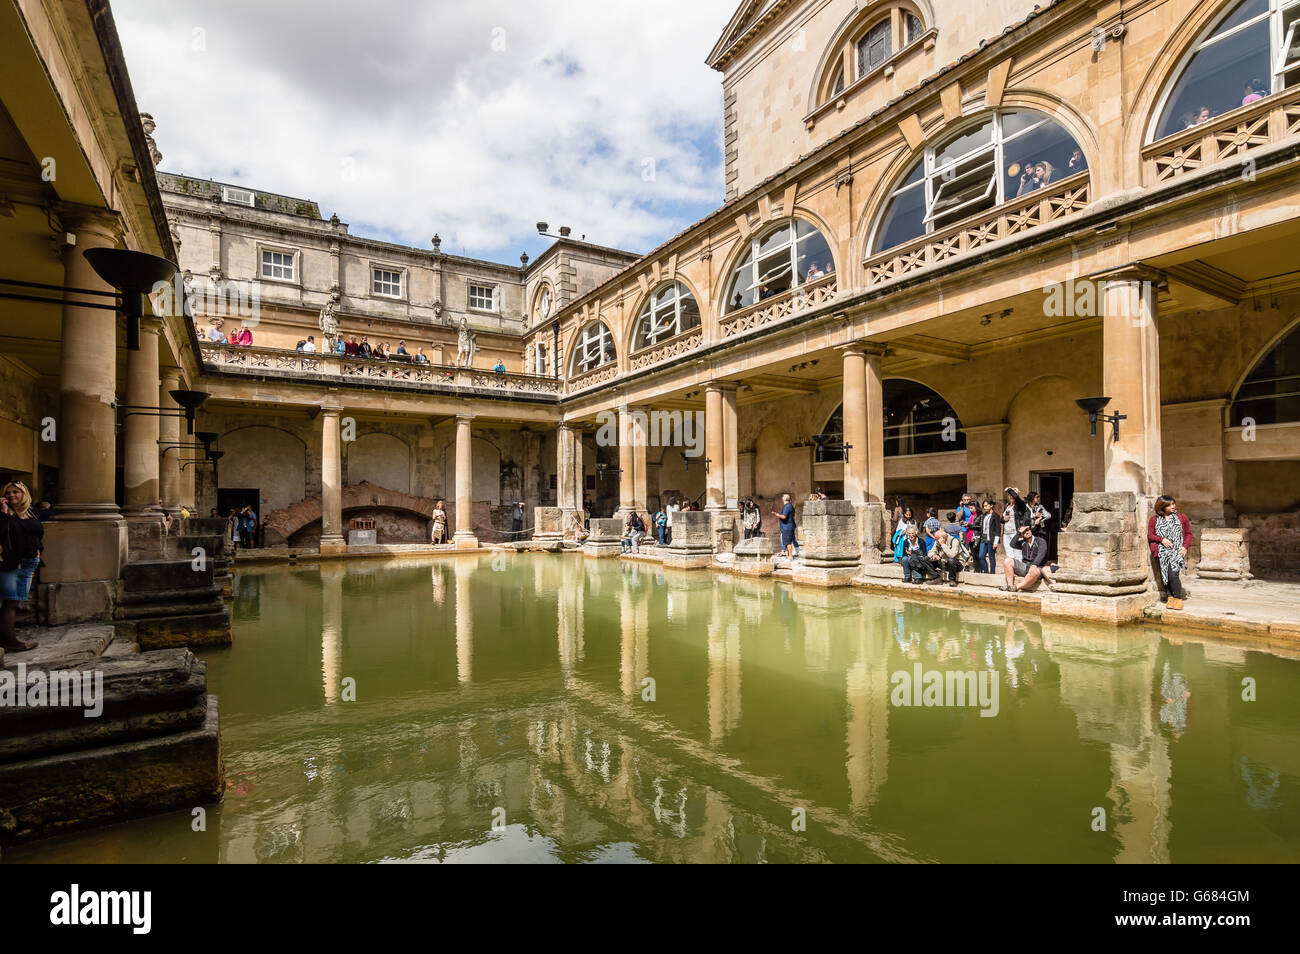 Bath, UK - August 15, 2015: The Roman Terms complex is a site of historical interest in the English city of Bath. Stock Photo